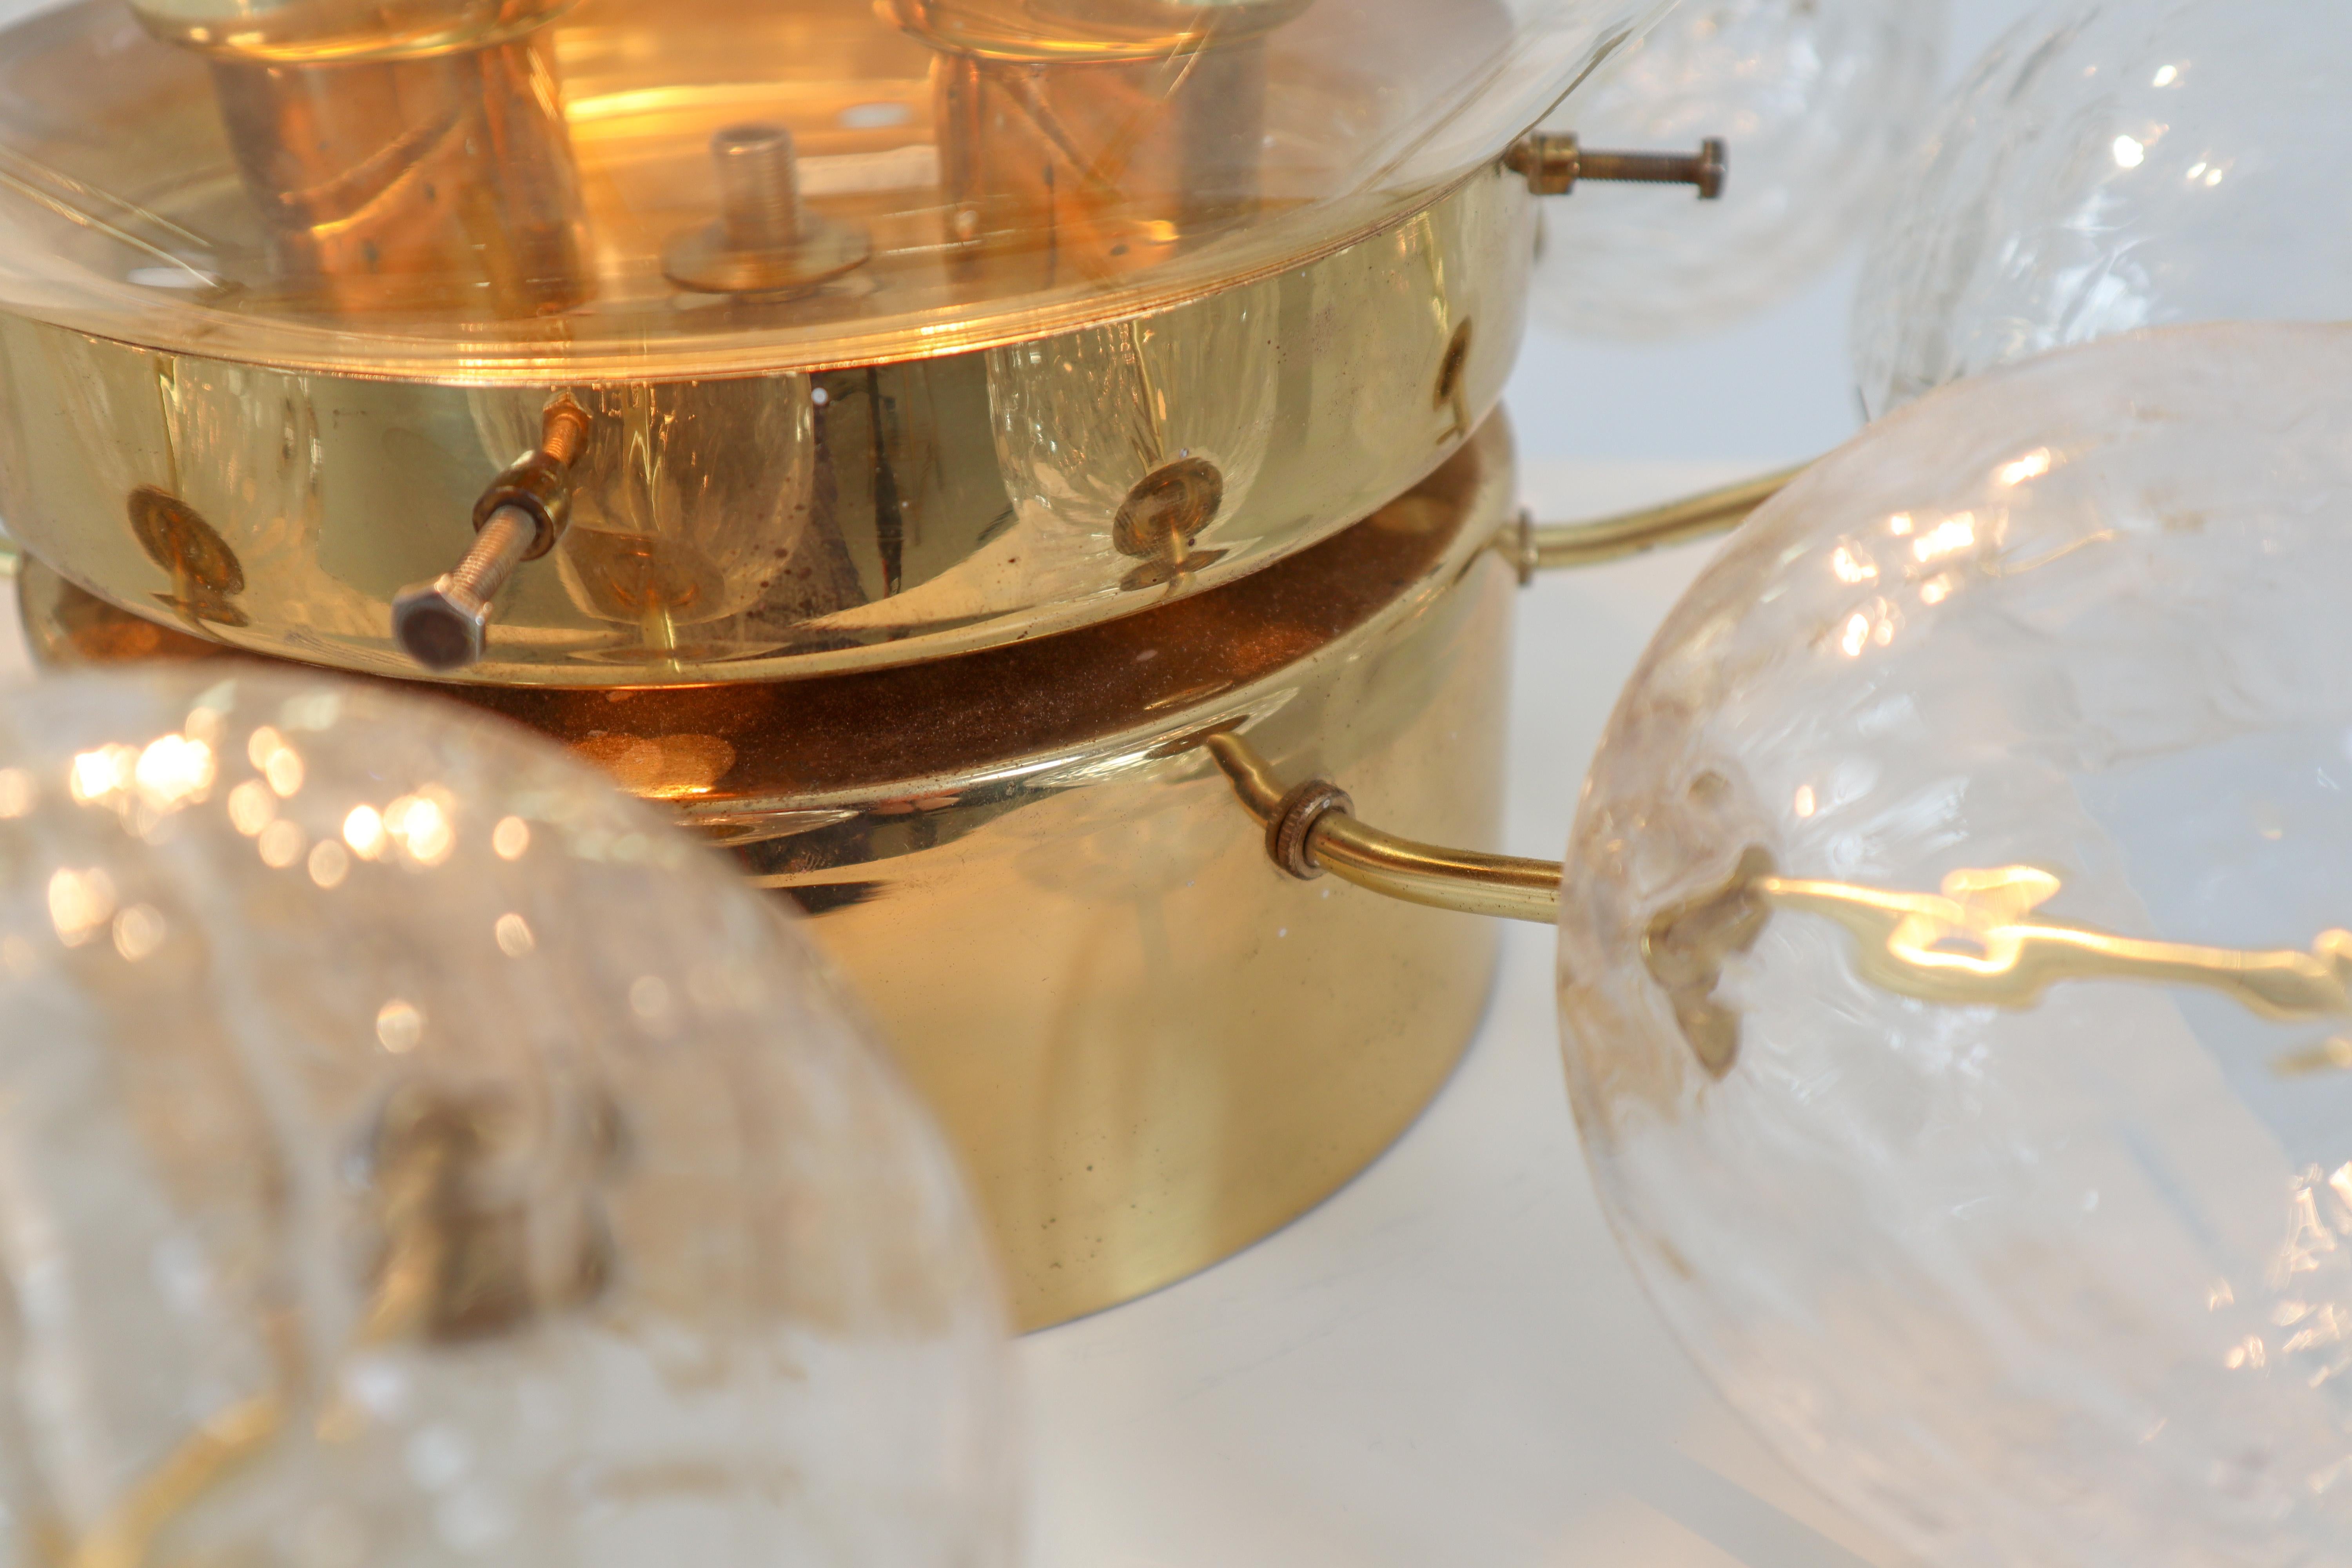 Large Midcentury Brass Ceiling Lamp-Chandelier with Handblown Art-Glass , 1960s For Sale 1